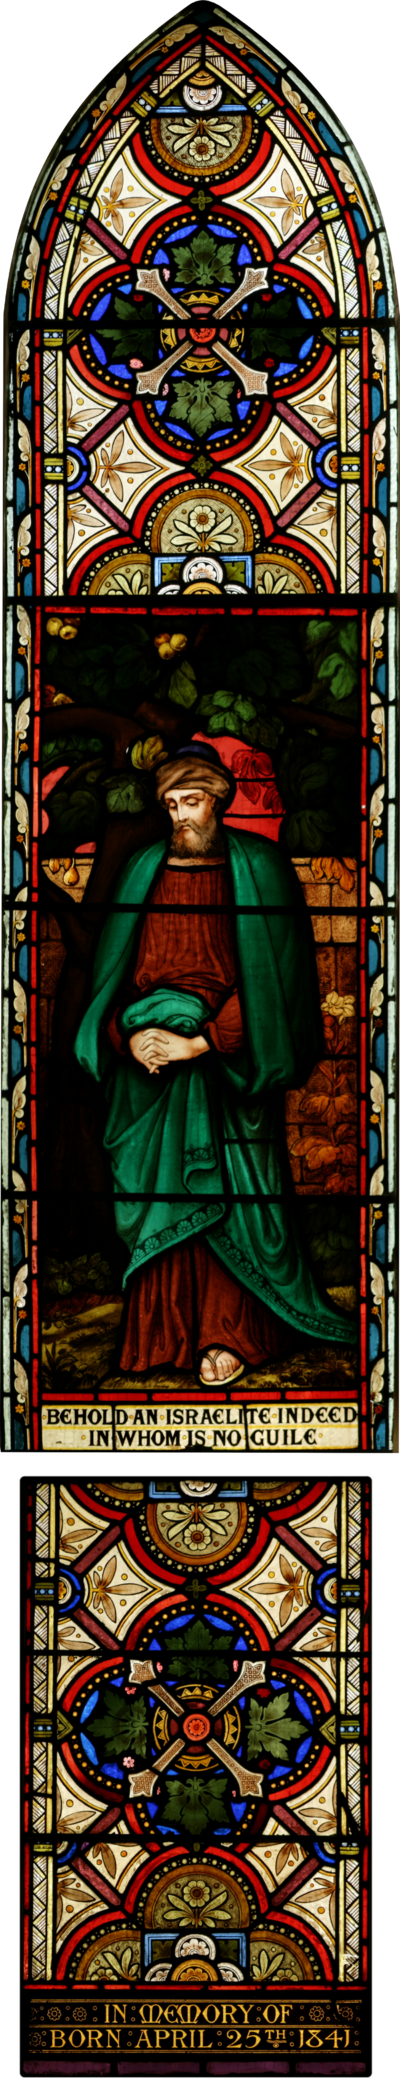 Thumbnail for File:StJohnsAshfield StainedGlass Nathanael.png